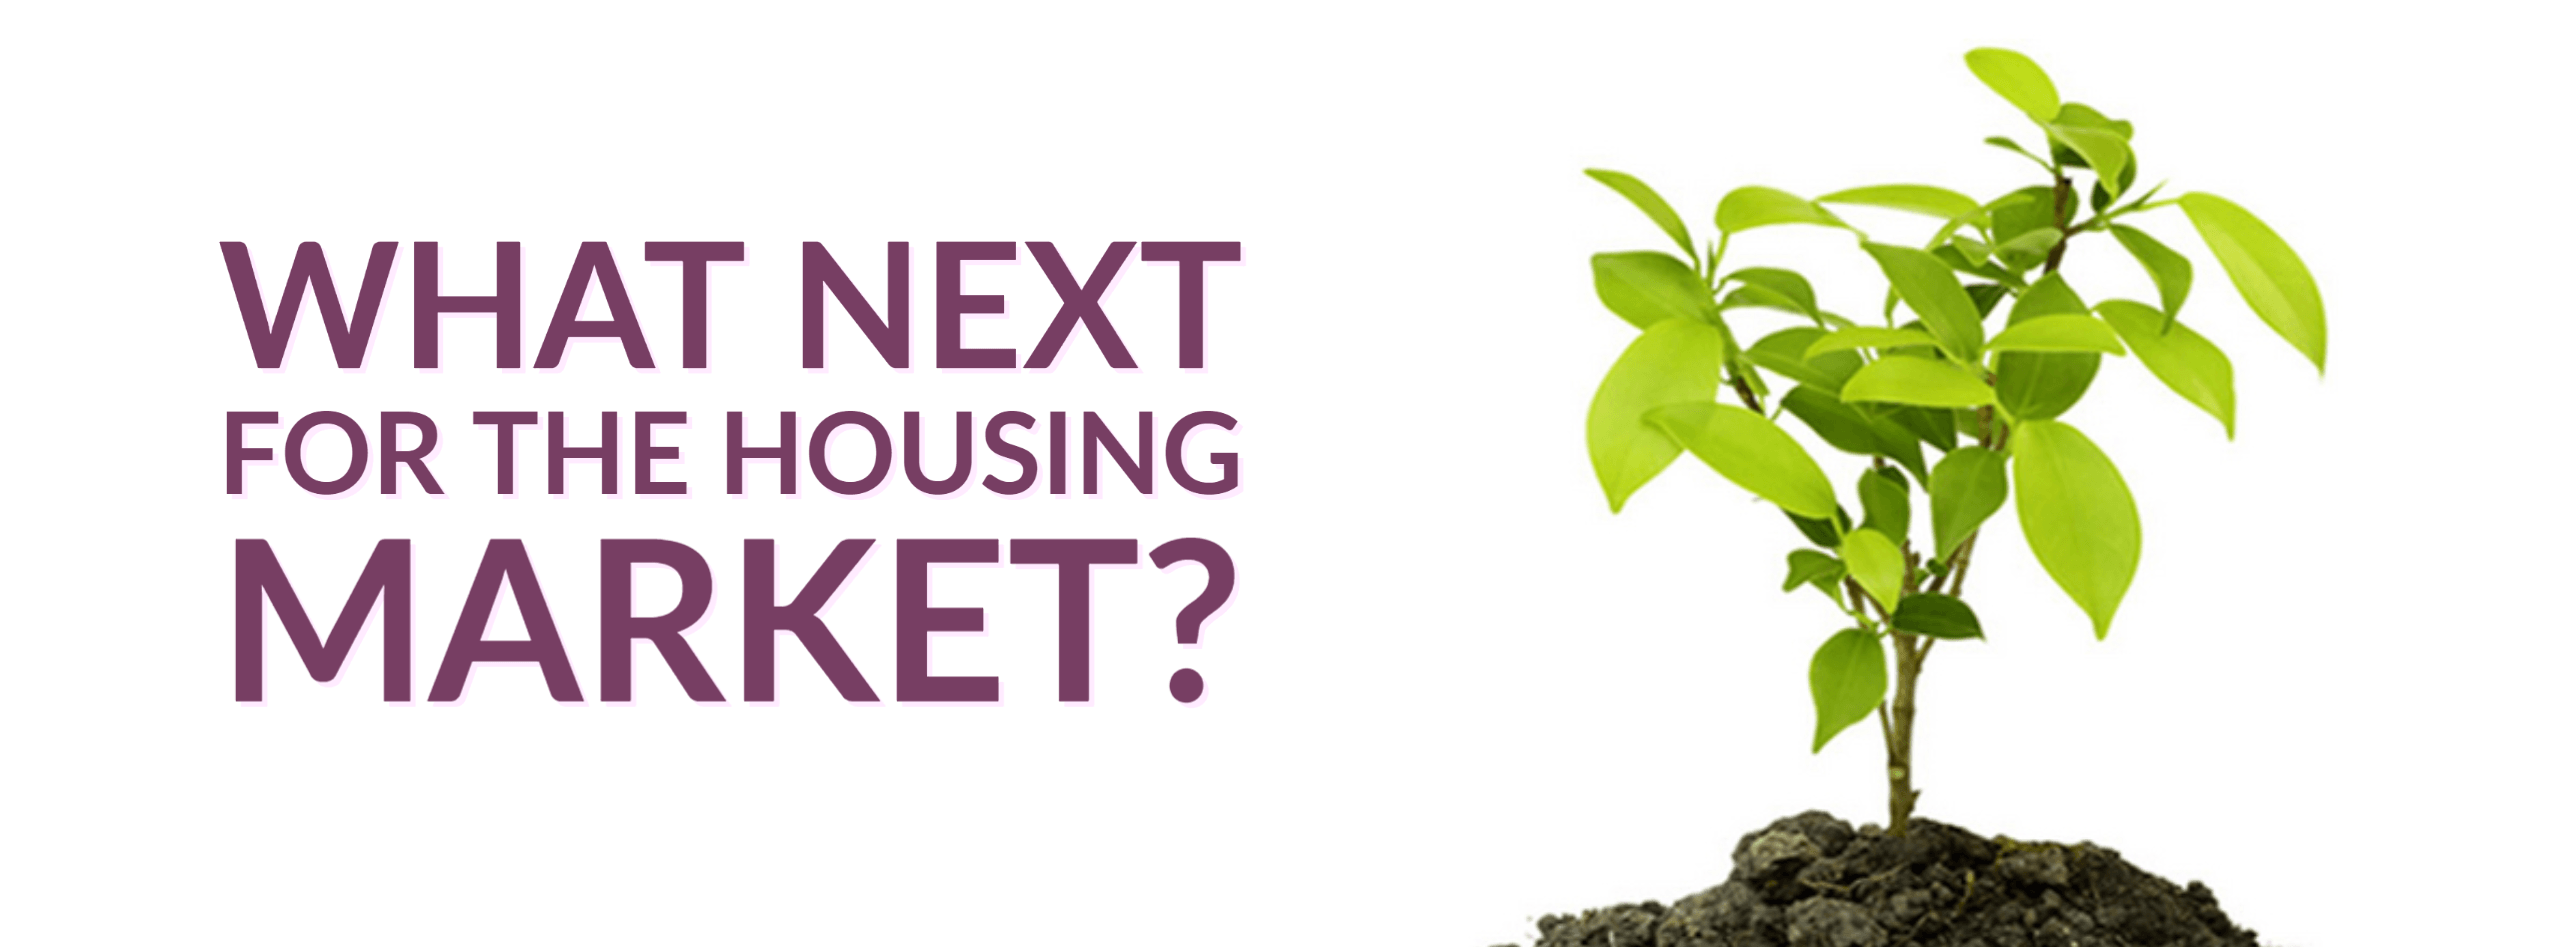 What Next For The Housing Market?